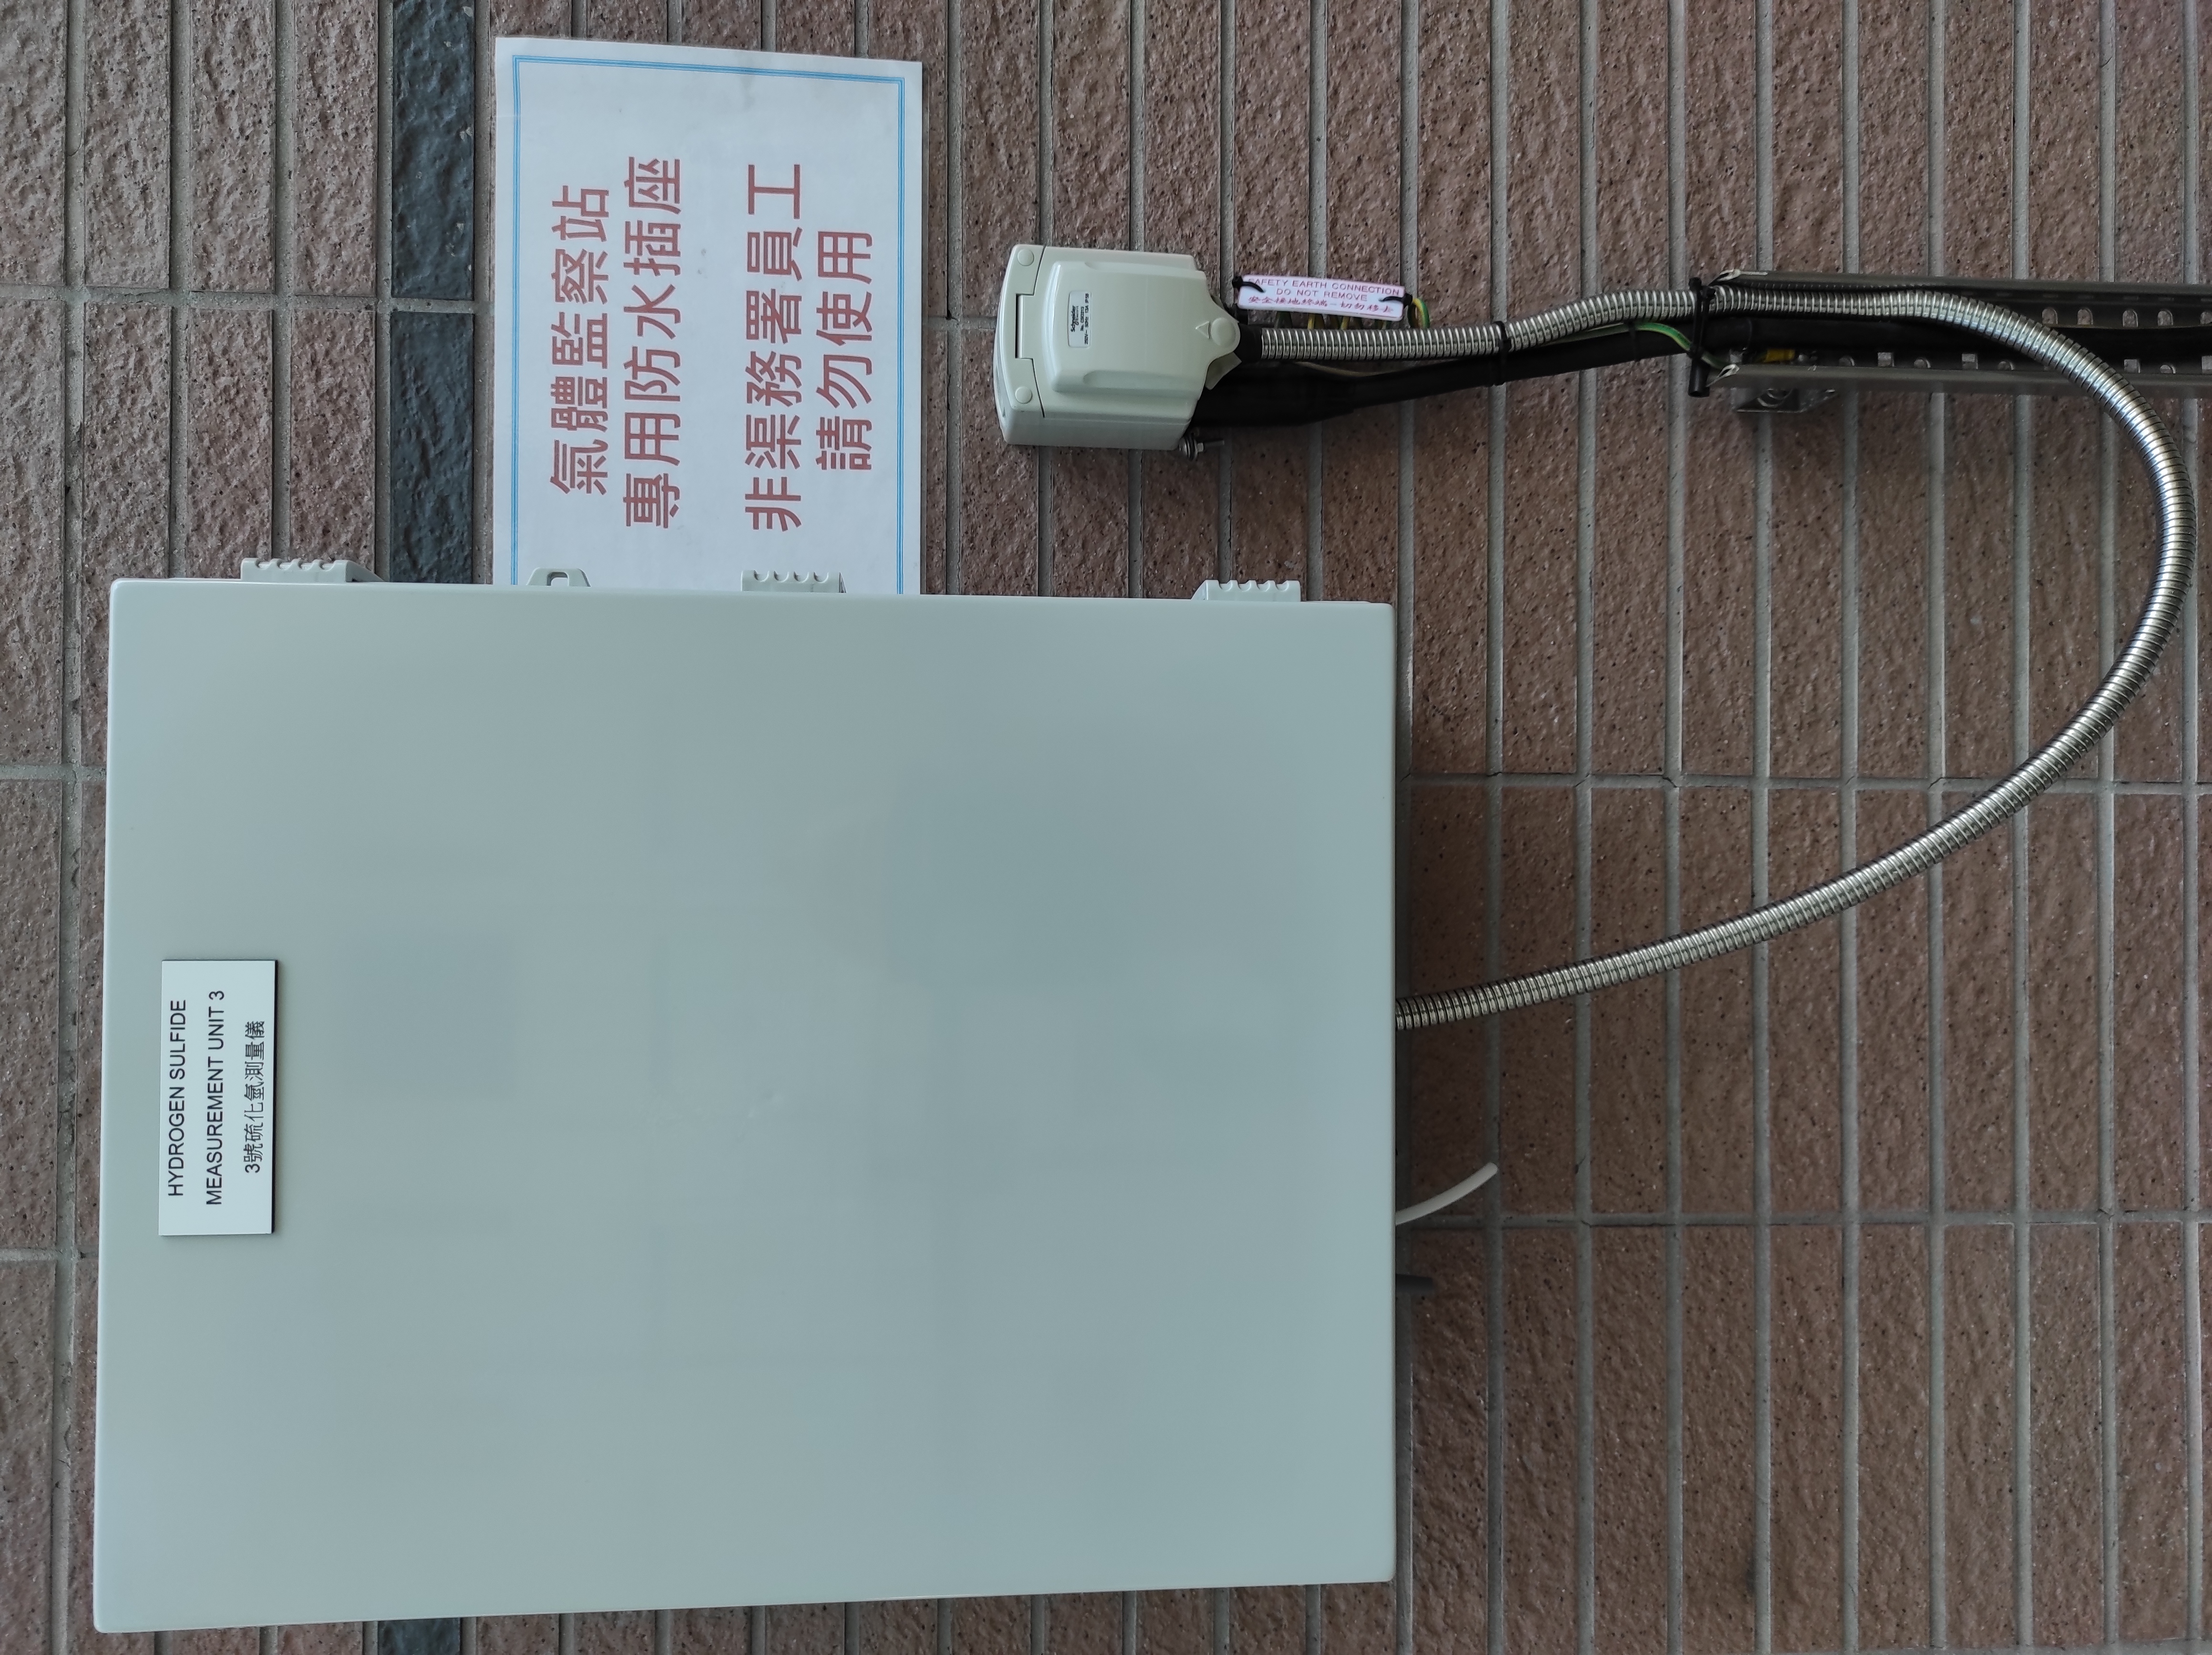 External View of Installed H₂S Measurement Unit Panels 1-6 After Works in DSD Kwun Tong PTW (Typical)